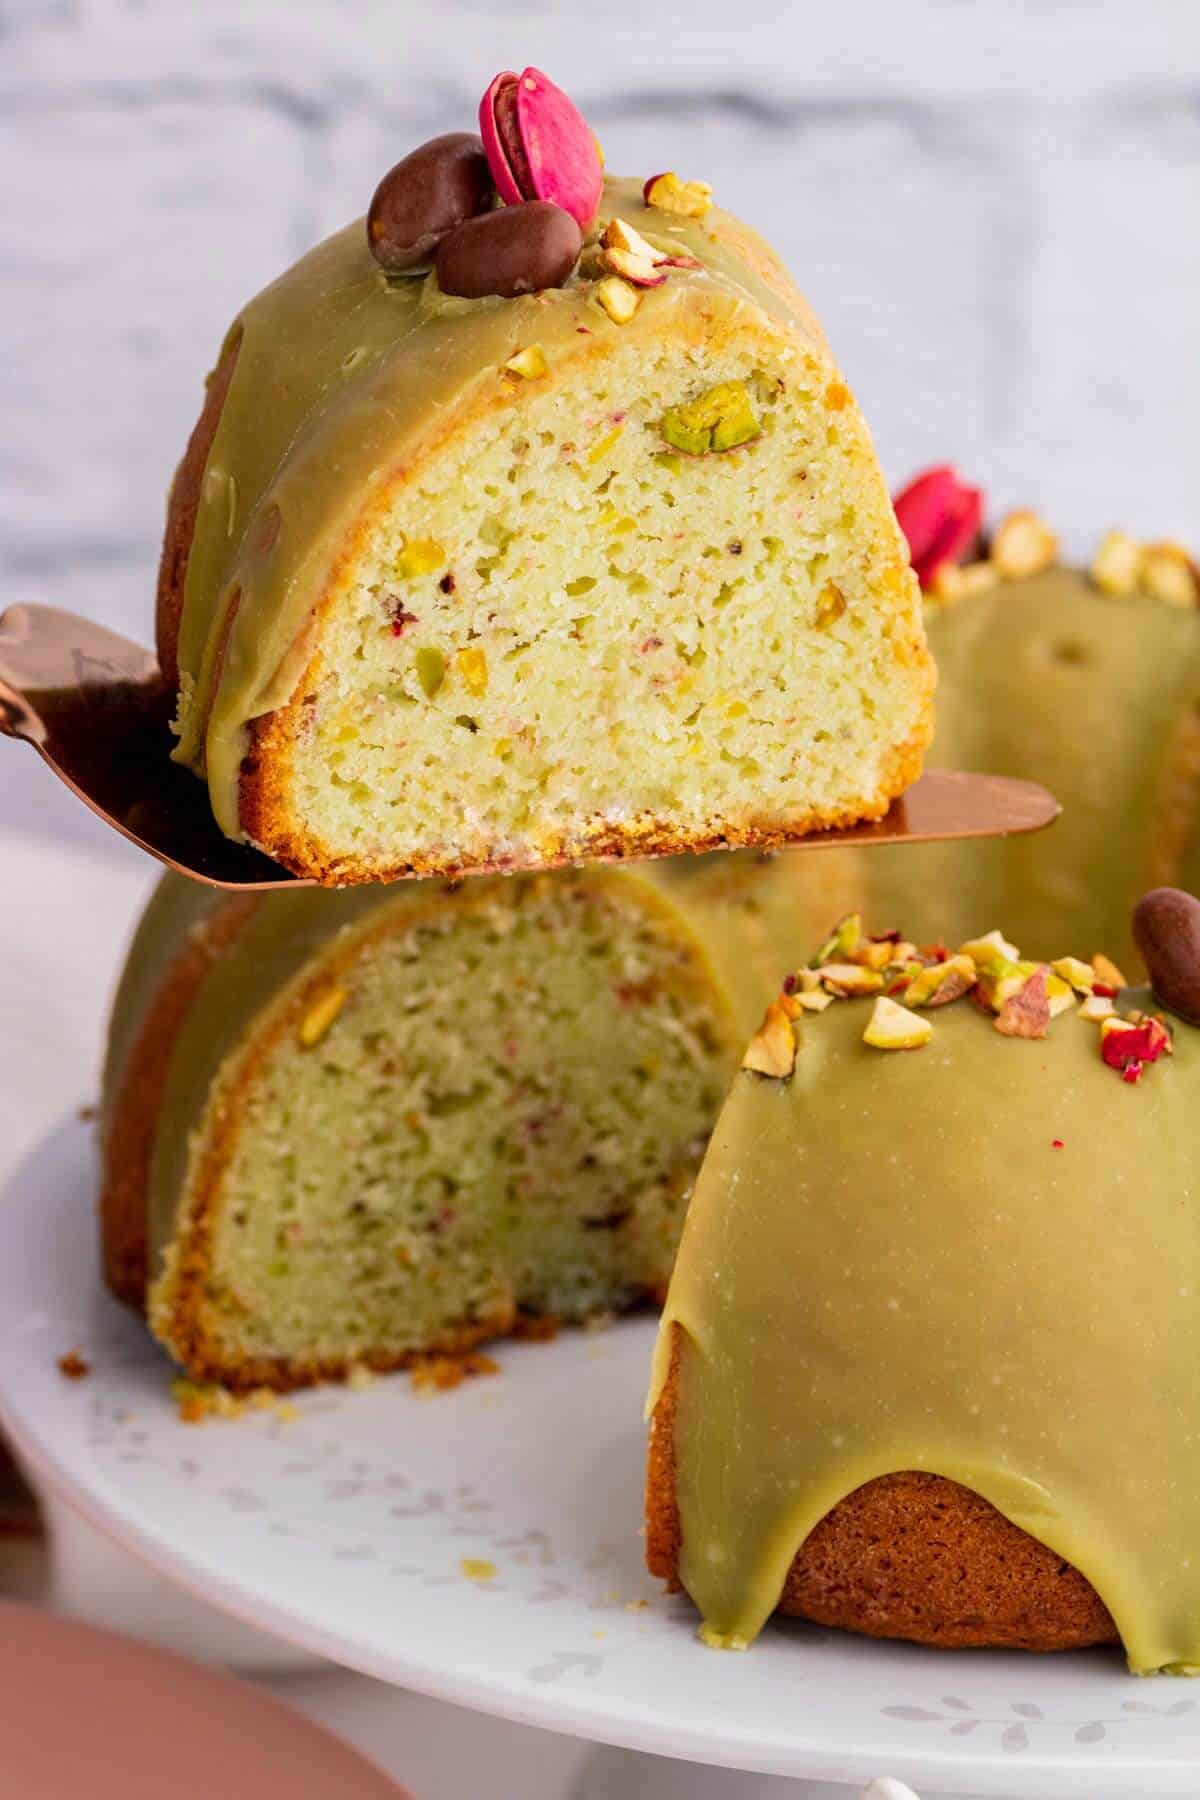 A slice being served from a green glazed bundt cake decorated with pink and chocolate pistachios.